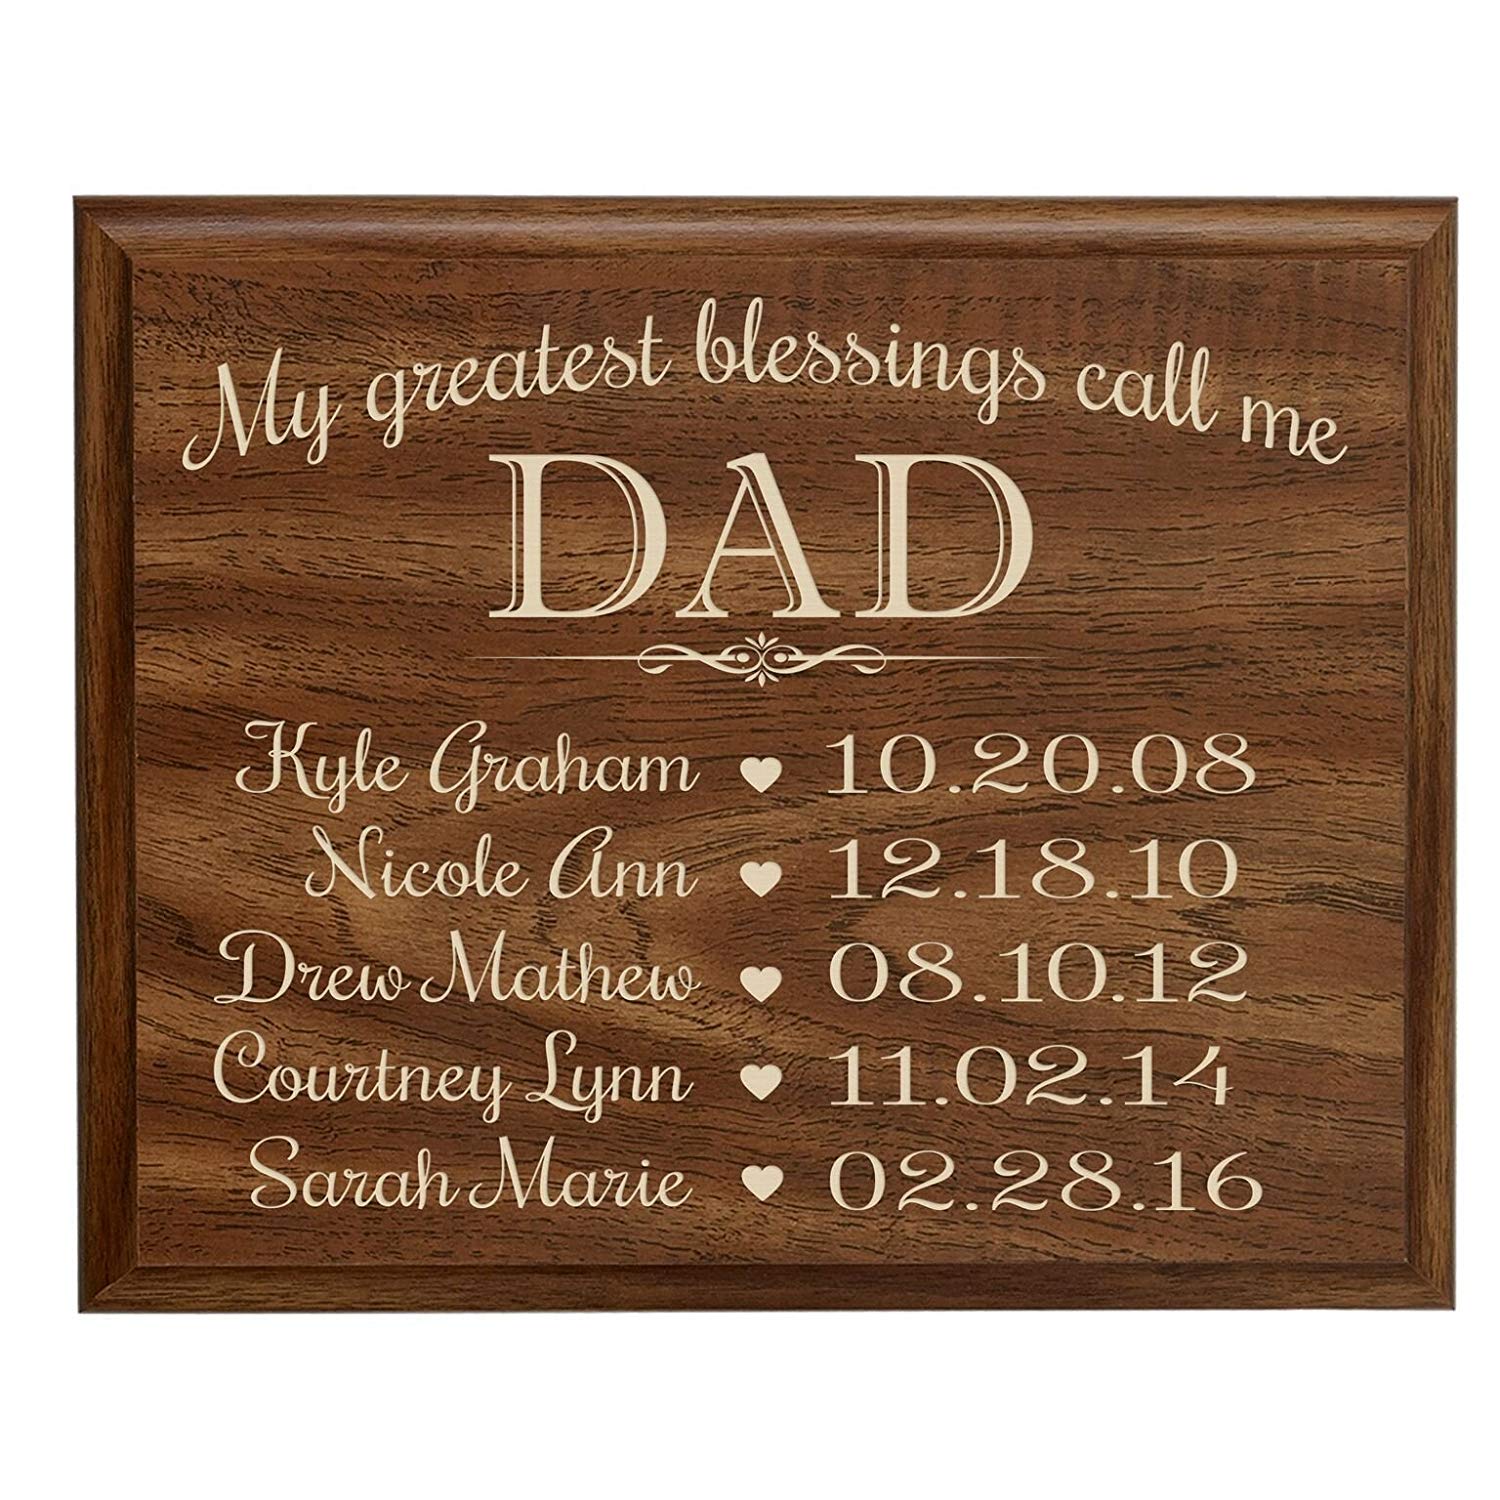 Personalized Hanging Wall Plaque For Dad - My Greatest Blessings - LifeSong Milestones